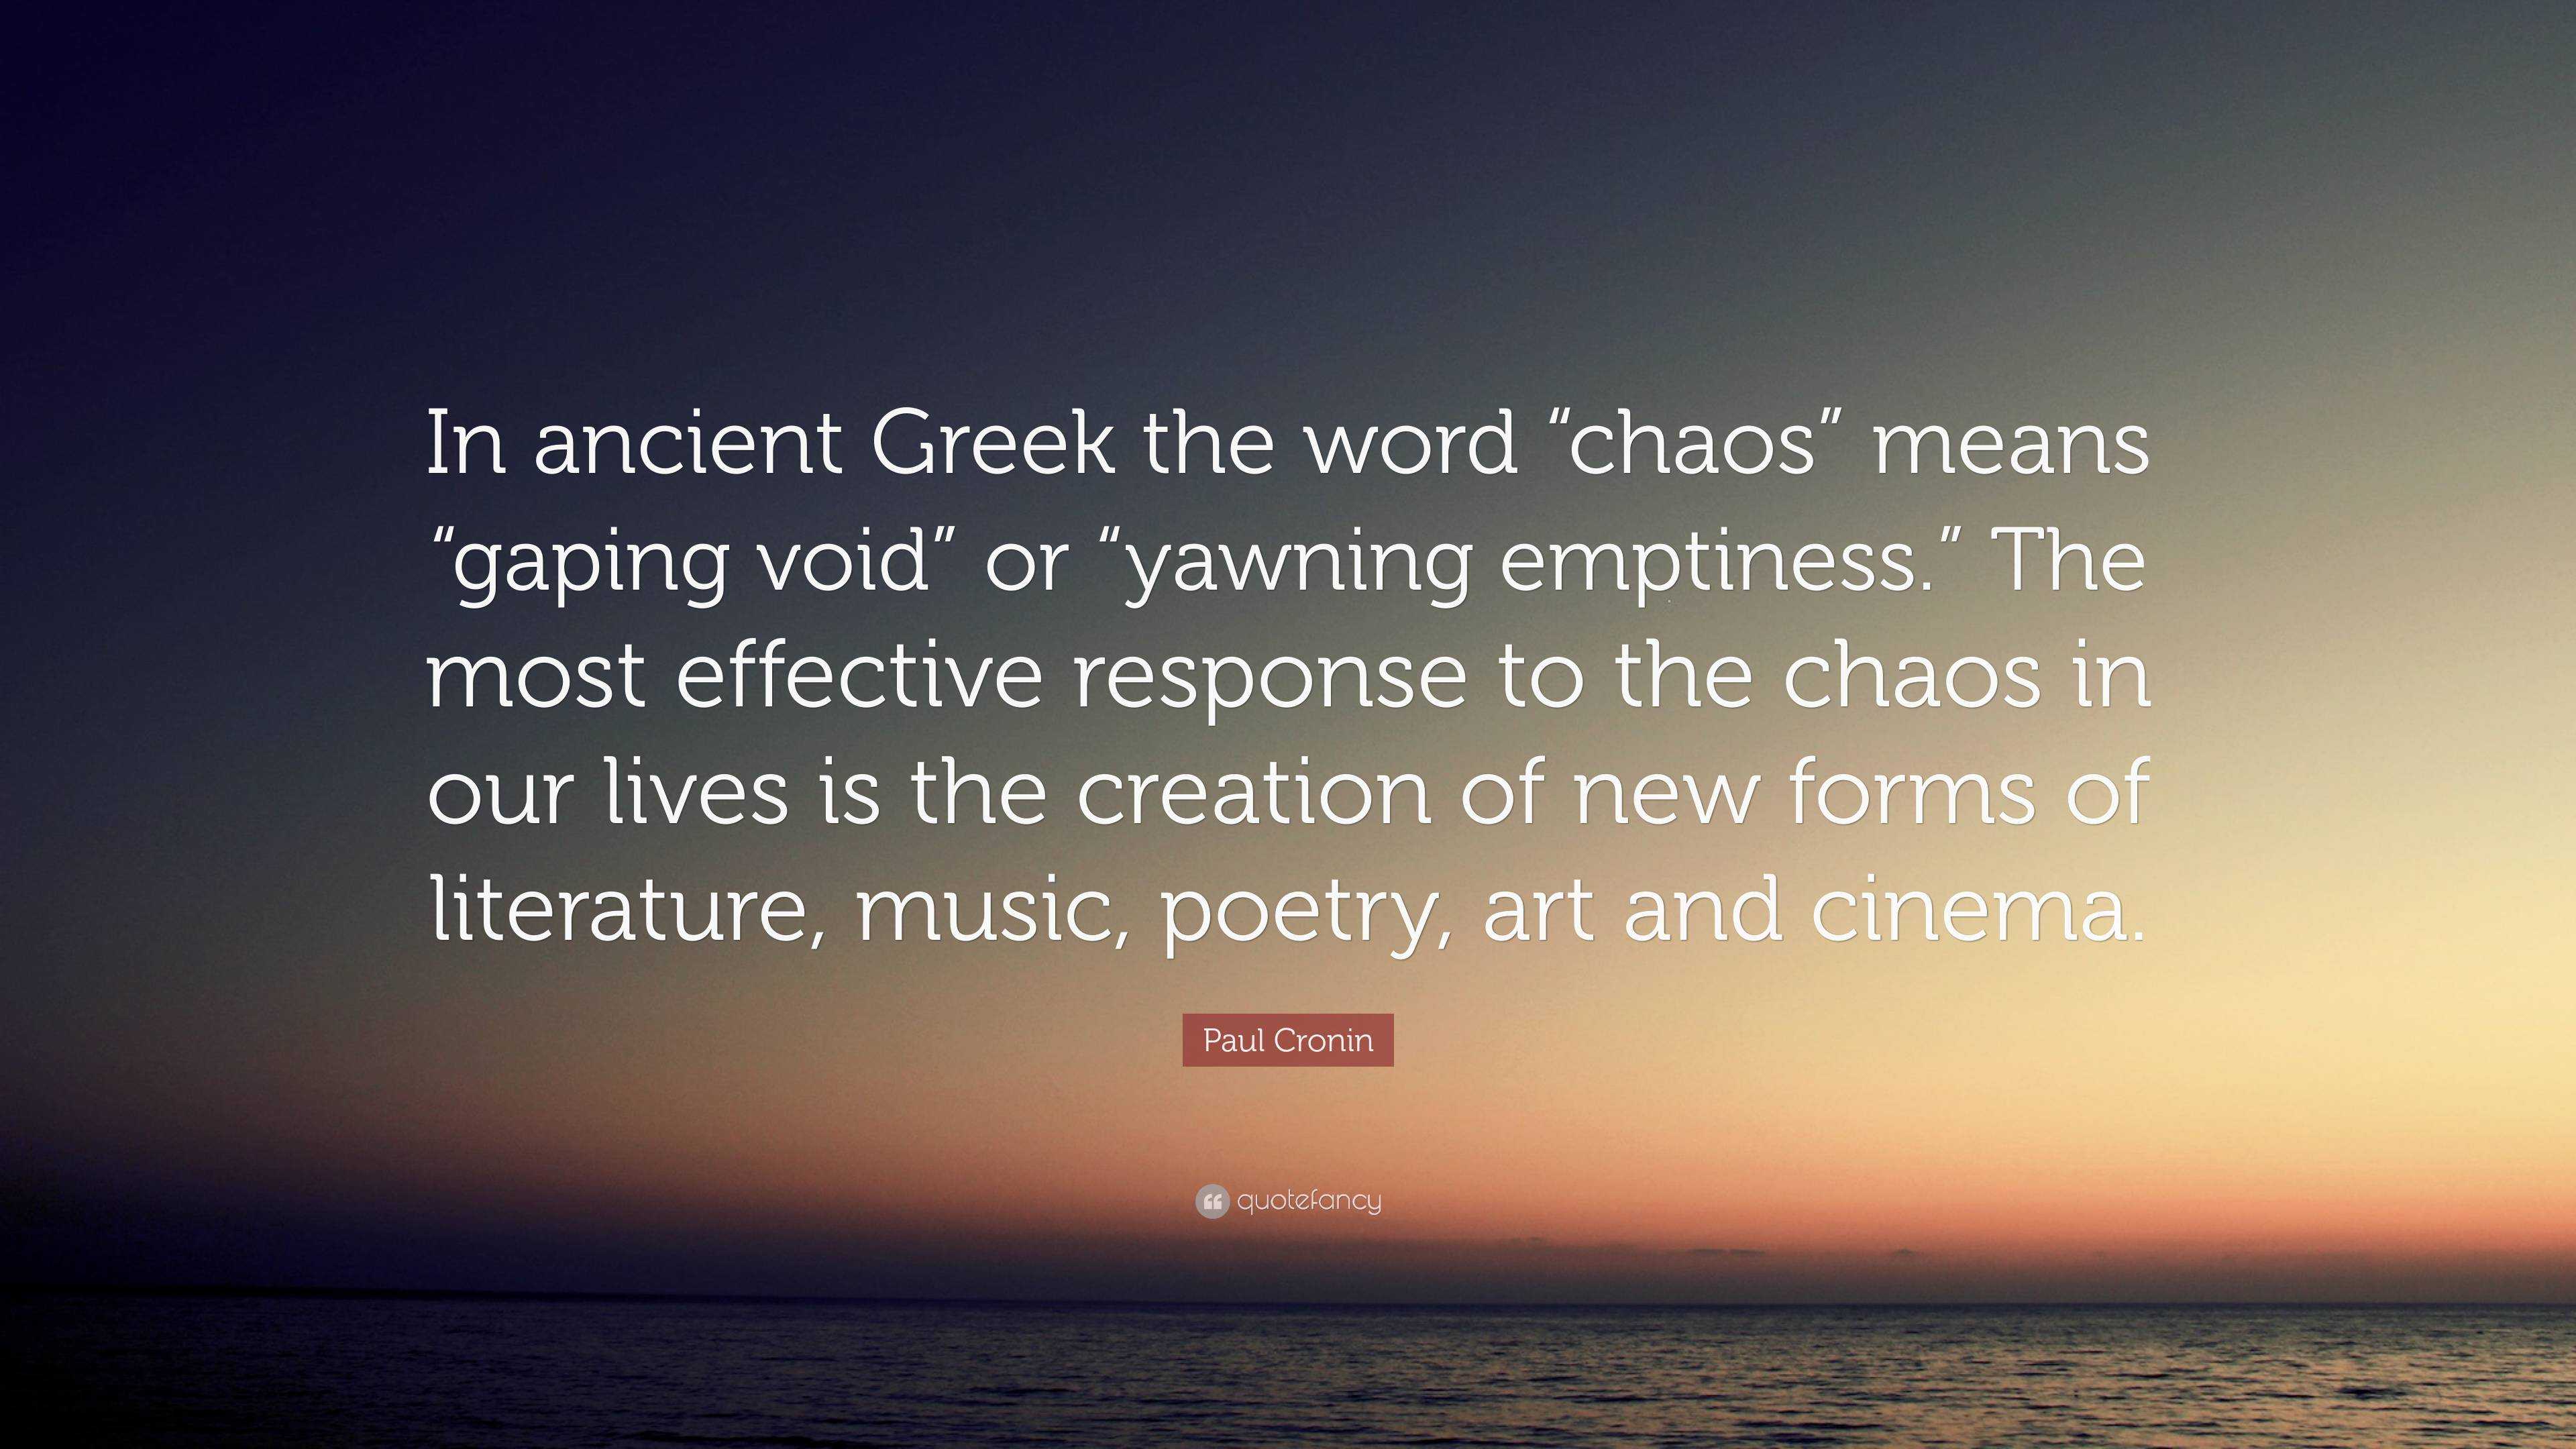 https://quotefancy.com/media/wallpaper/3840x2160/6678740-Paul-Cronin-Quote-In-ancient-Greek-the-word-chaos-means-gaping.jpg